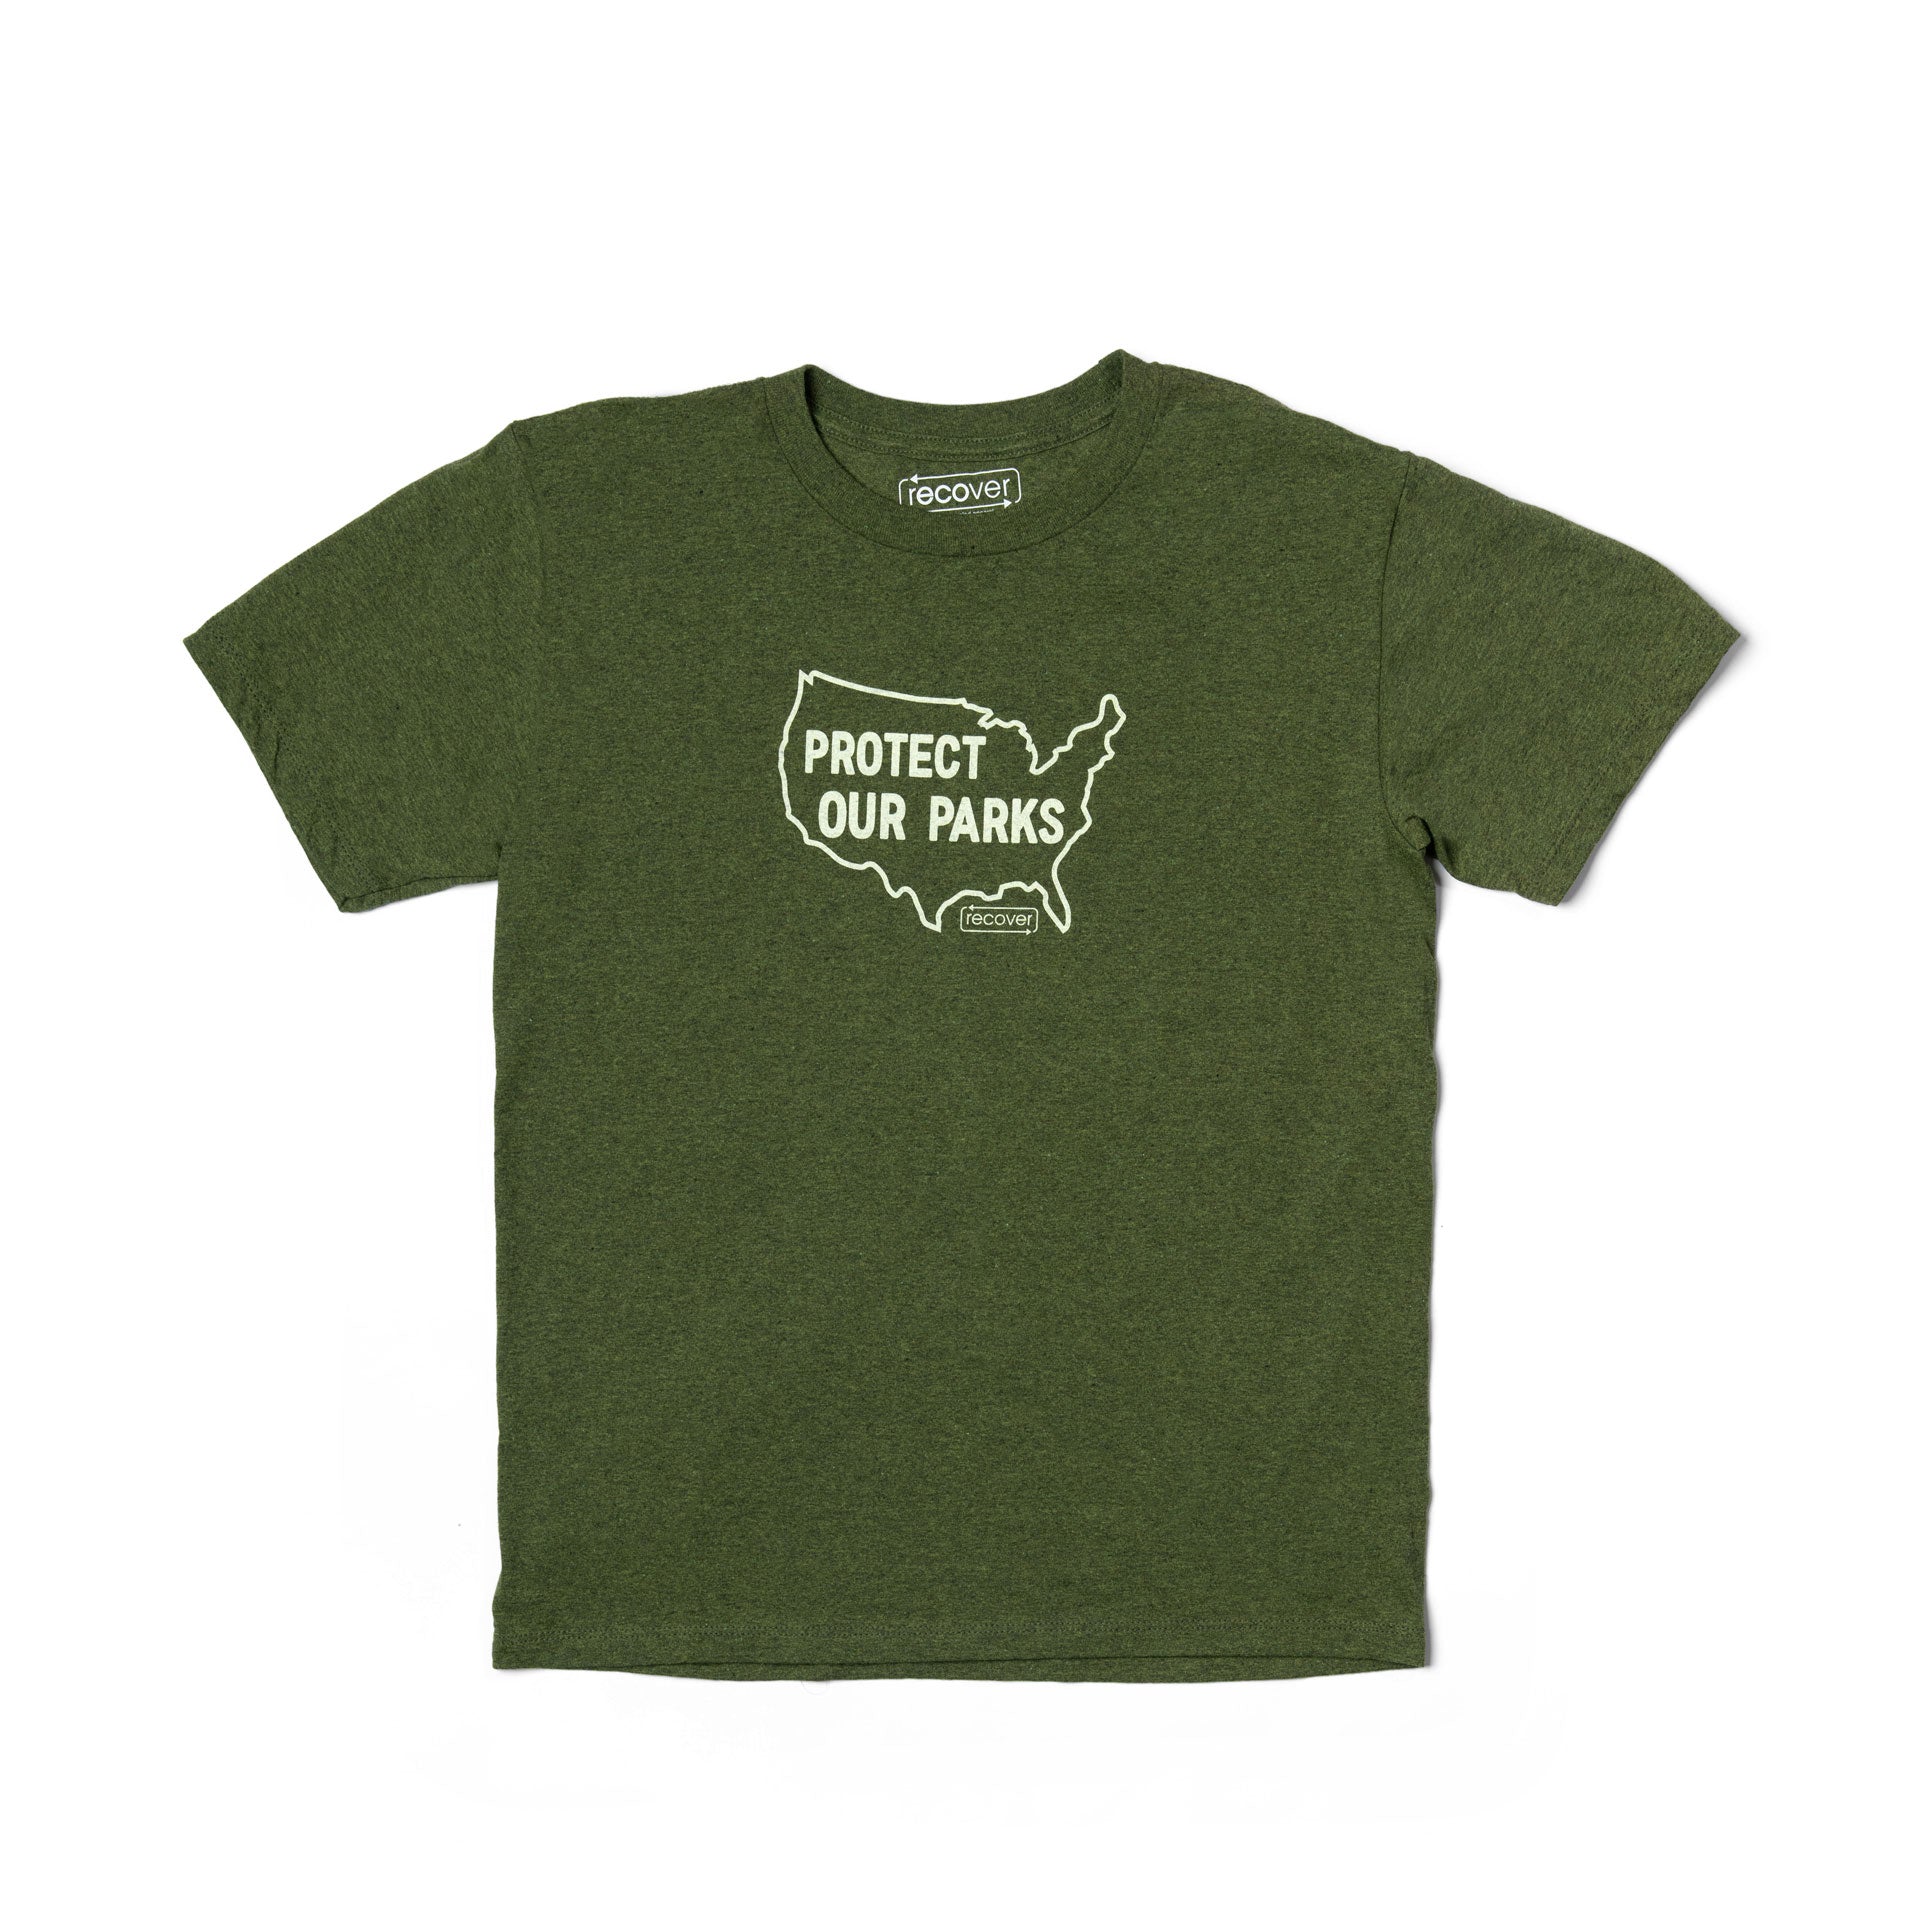 RY100 - Youth Protect Our Parks Short Sleeve T-Shirt